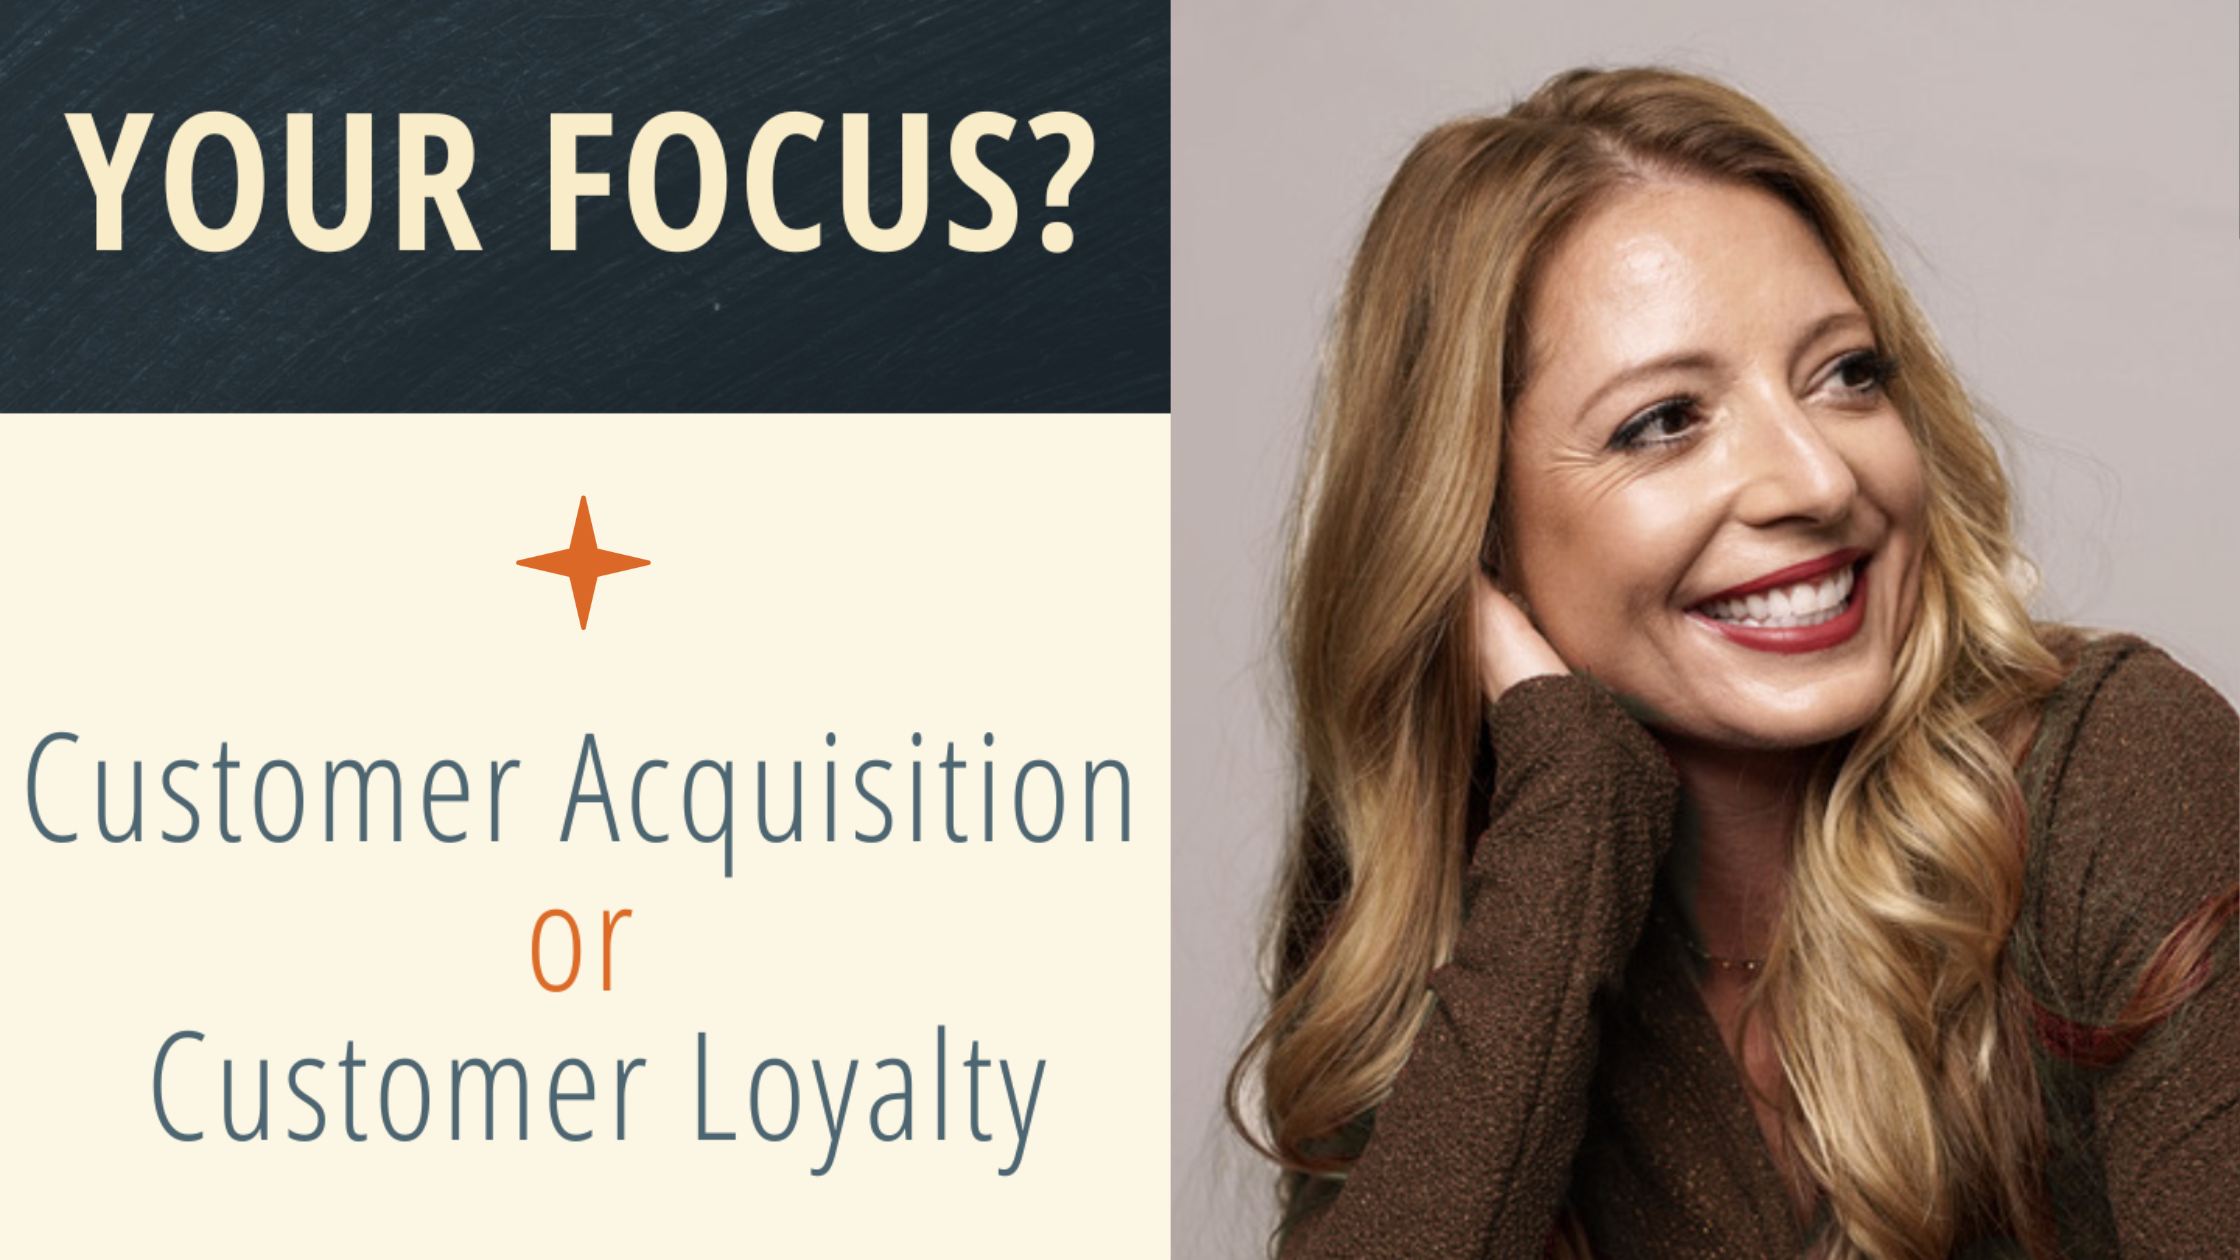 Customer Acquisition or Customer Loyalty?